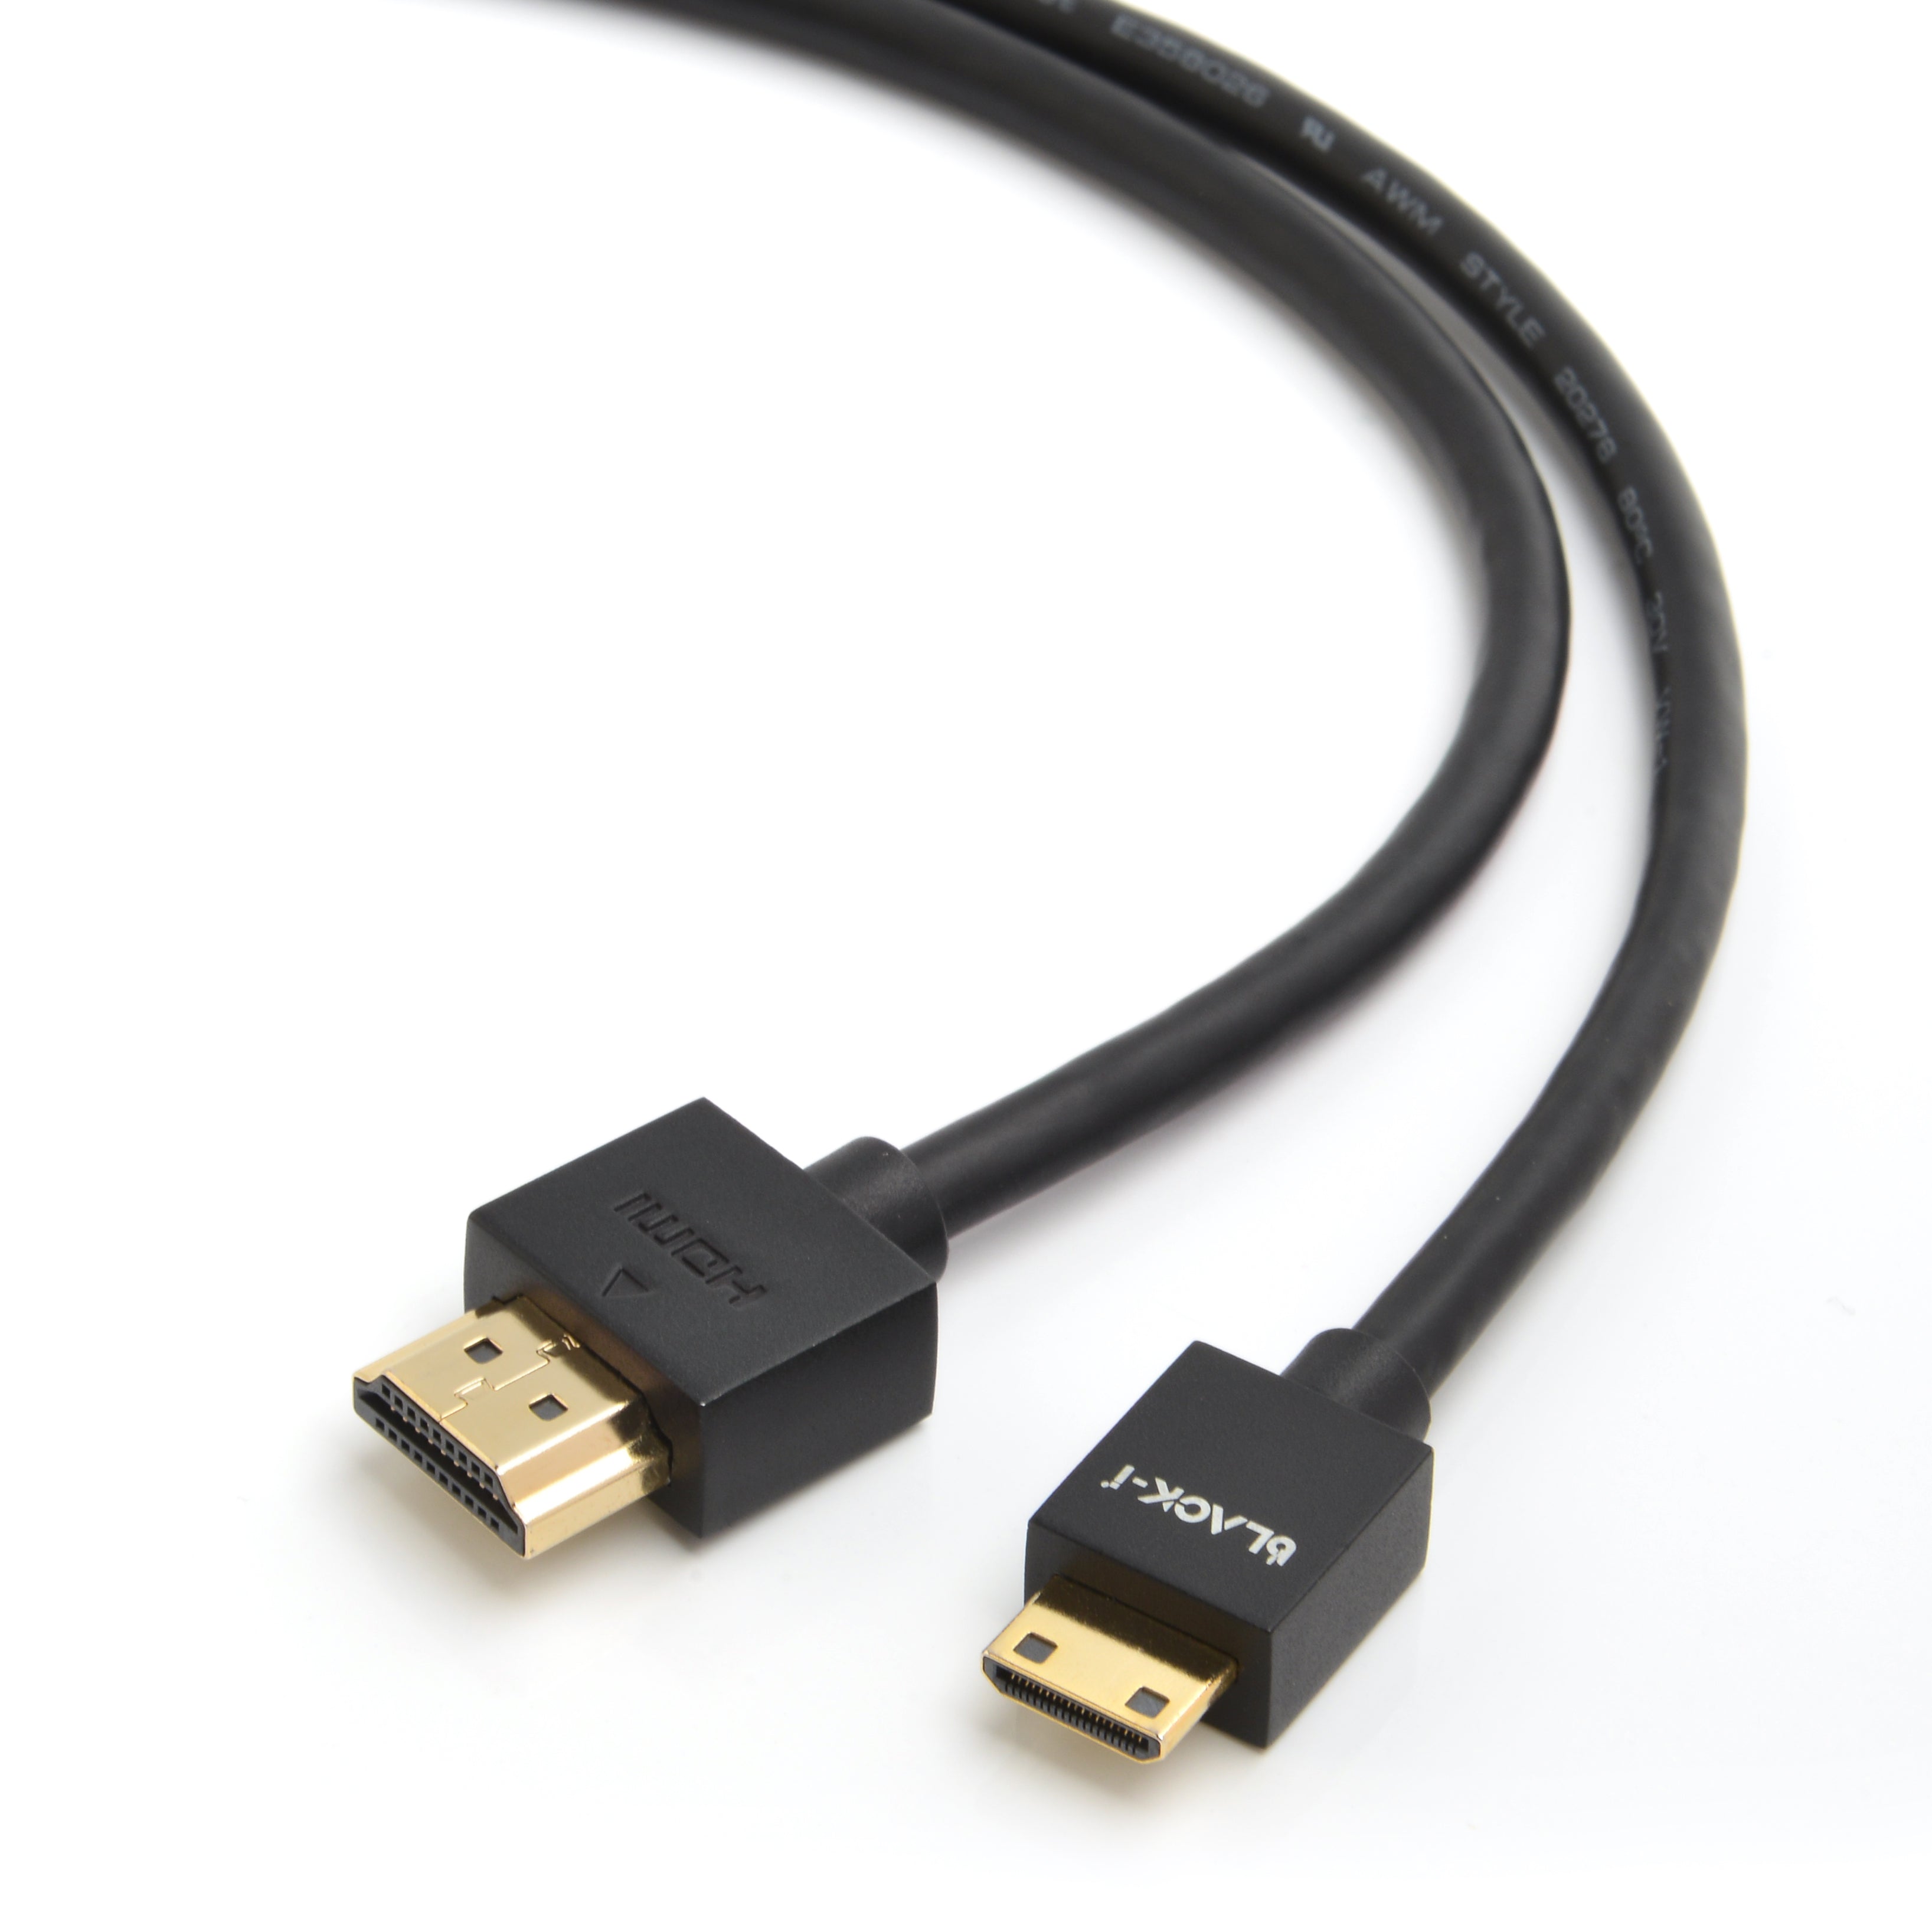 Black-i Mini HDMI to HDMI Cable - 4K@60Hz, 2 Meter Length – Crisp Visuals in a Compact Form for Superior Connectivity